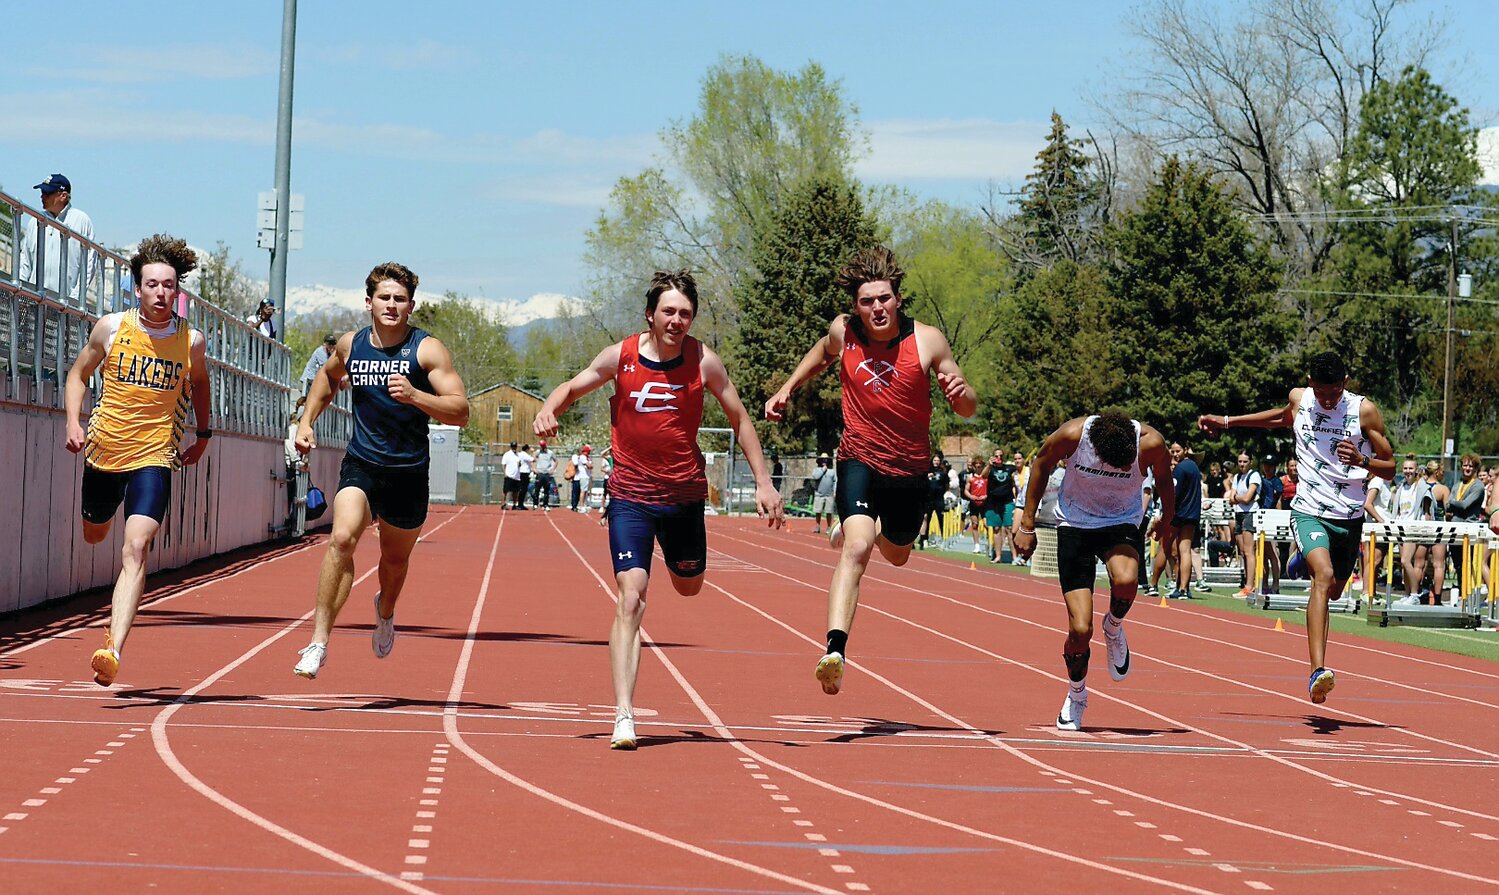 Red Devil sprinter Ayden Hartzell (3rd from left) wins the open 200 meter dash at Saturday’s Davis Invitational, held at Davis High School in Kaysville, Utah. Hartzell’s time of 21.99 set a new school record in the event; the speedy junior also set a new record in the 400 meter run, with a time of 48.89. Both records were previously held by Hartzell’s teammate, senior Gabe Hutchinson.